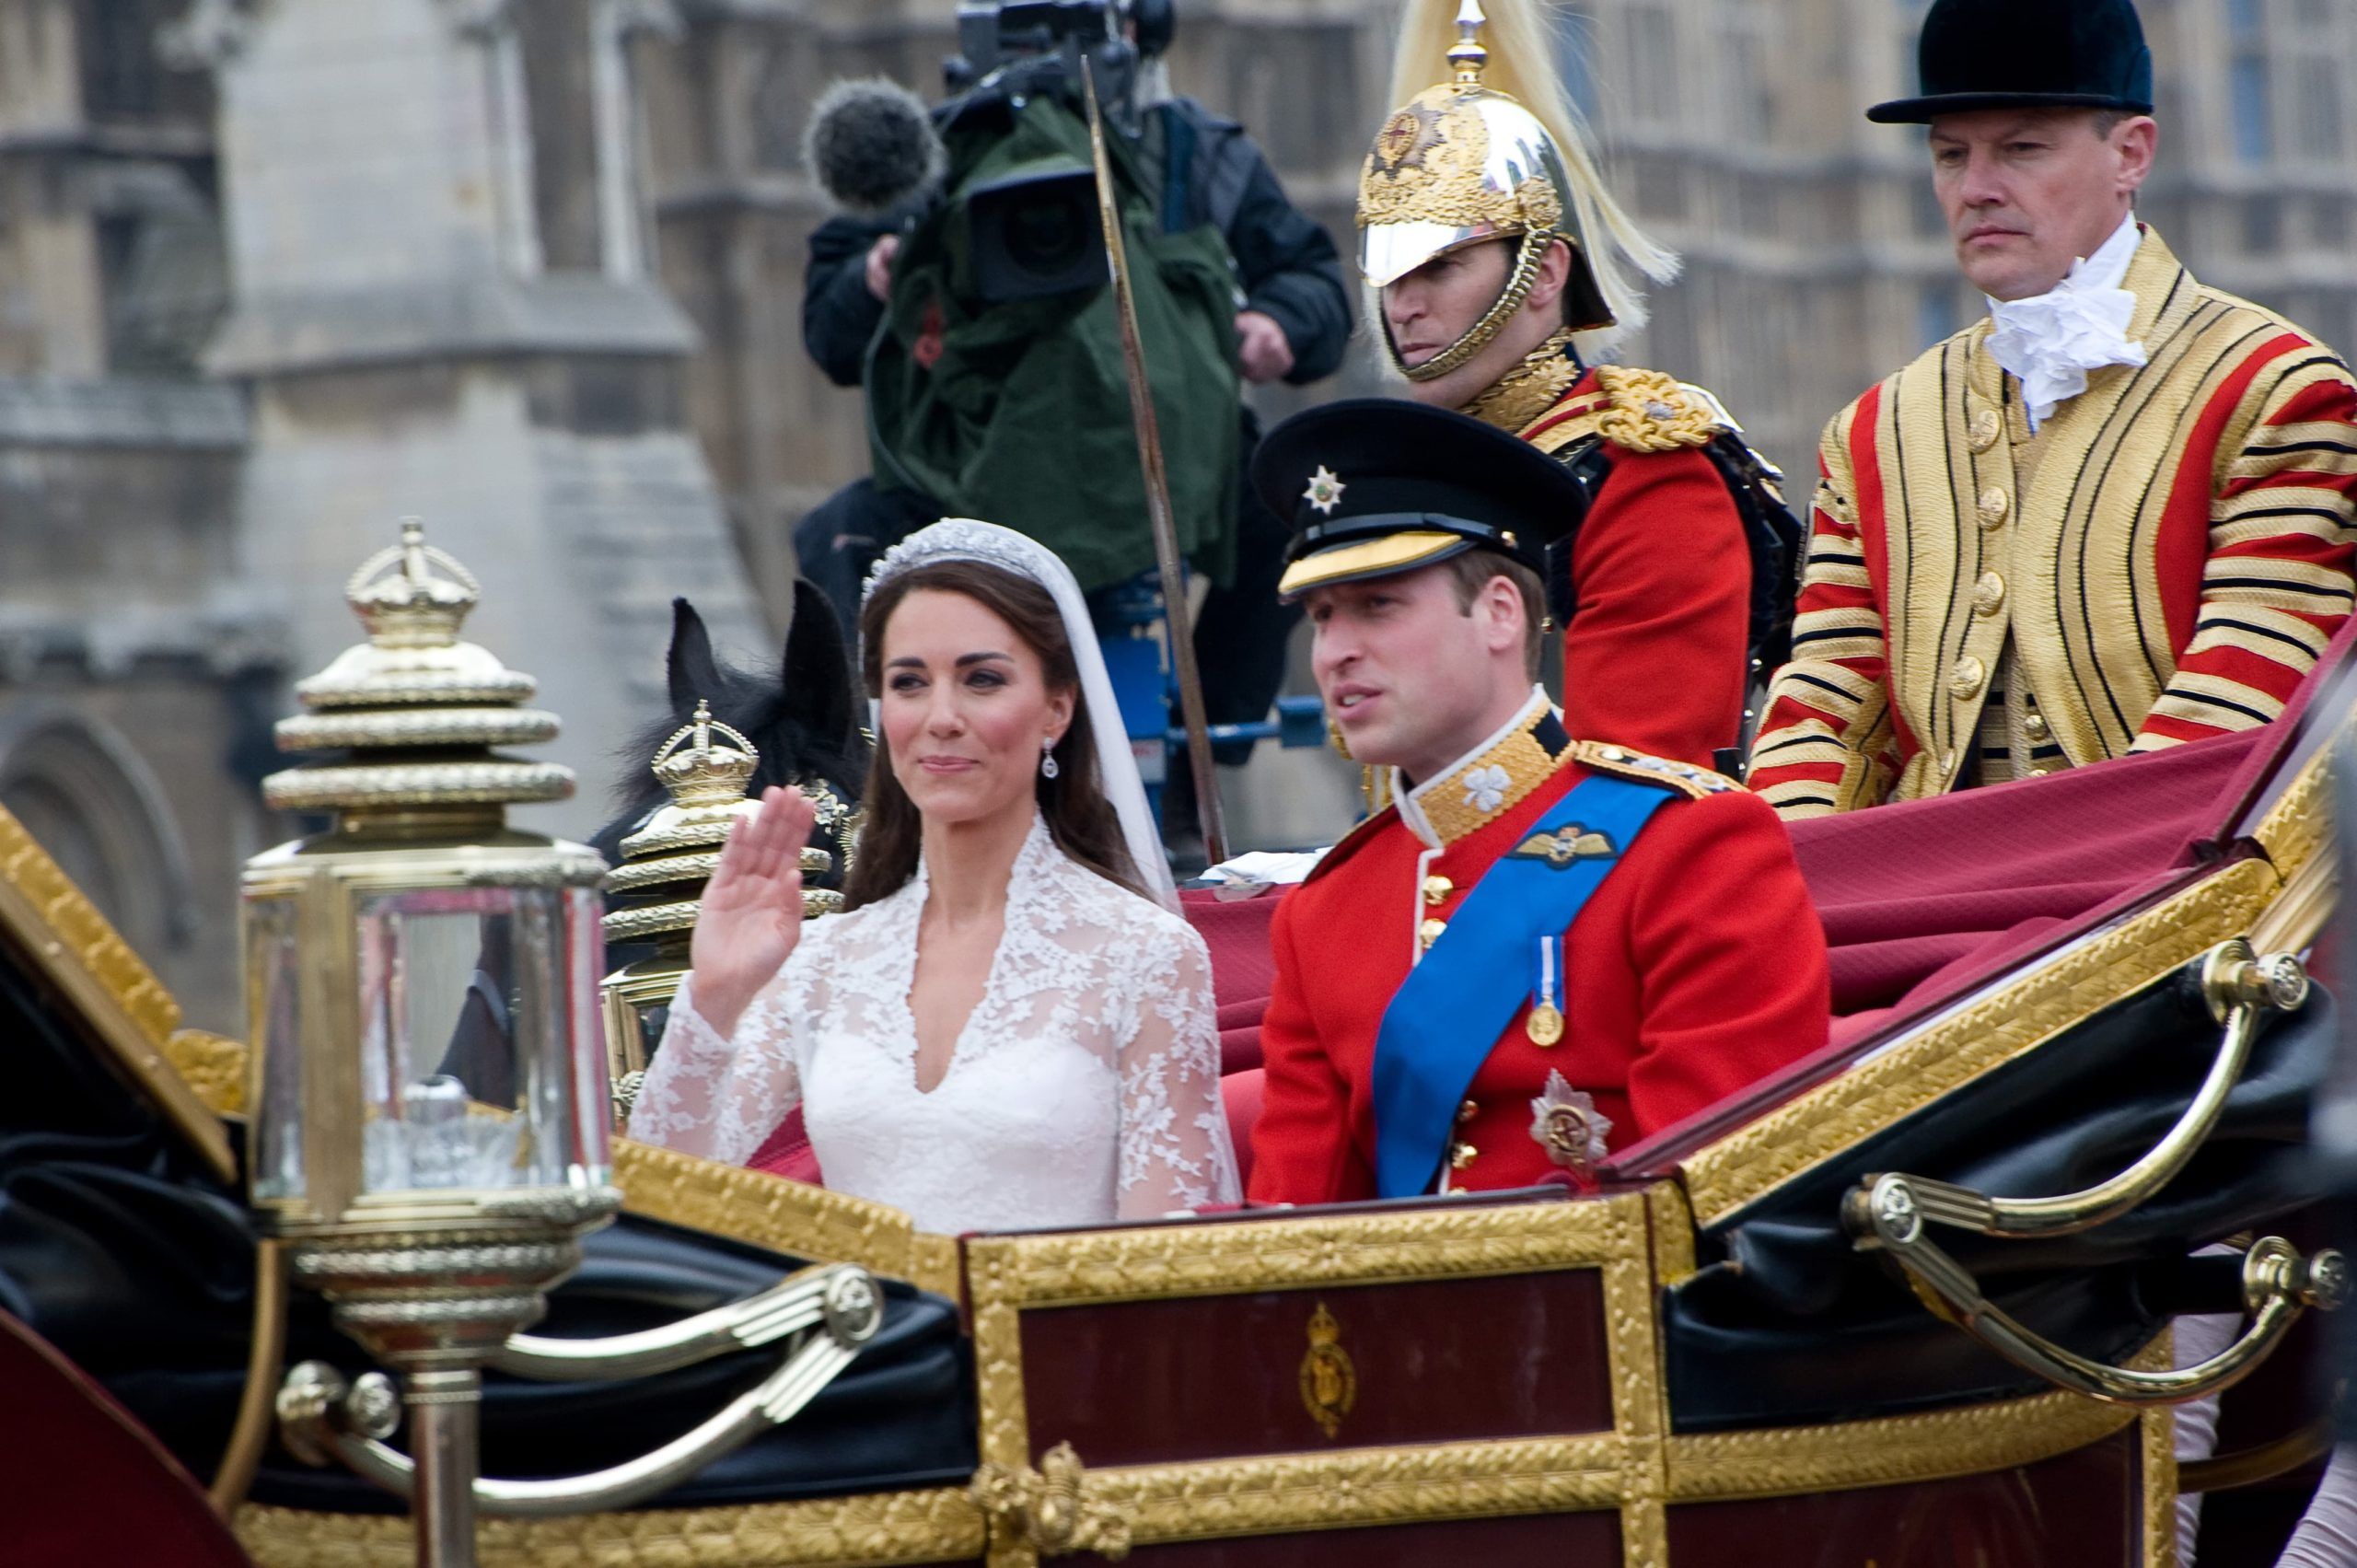 10 Most Expensive Weddings In History: How Royalty & Celebrities